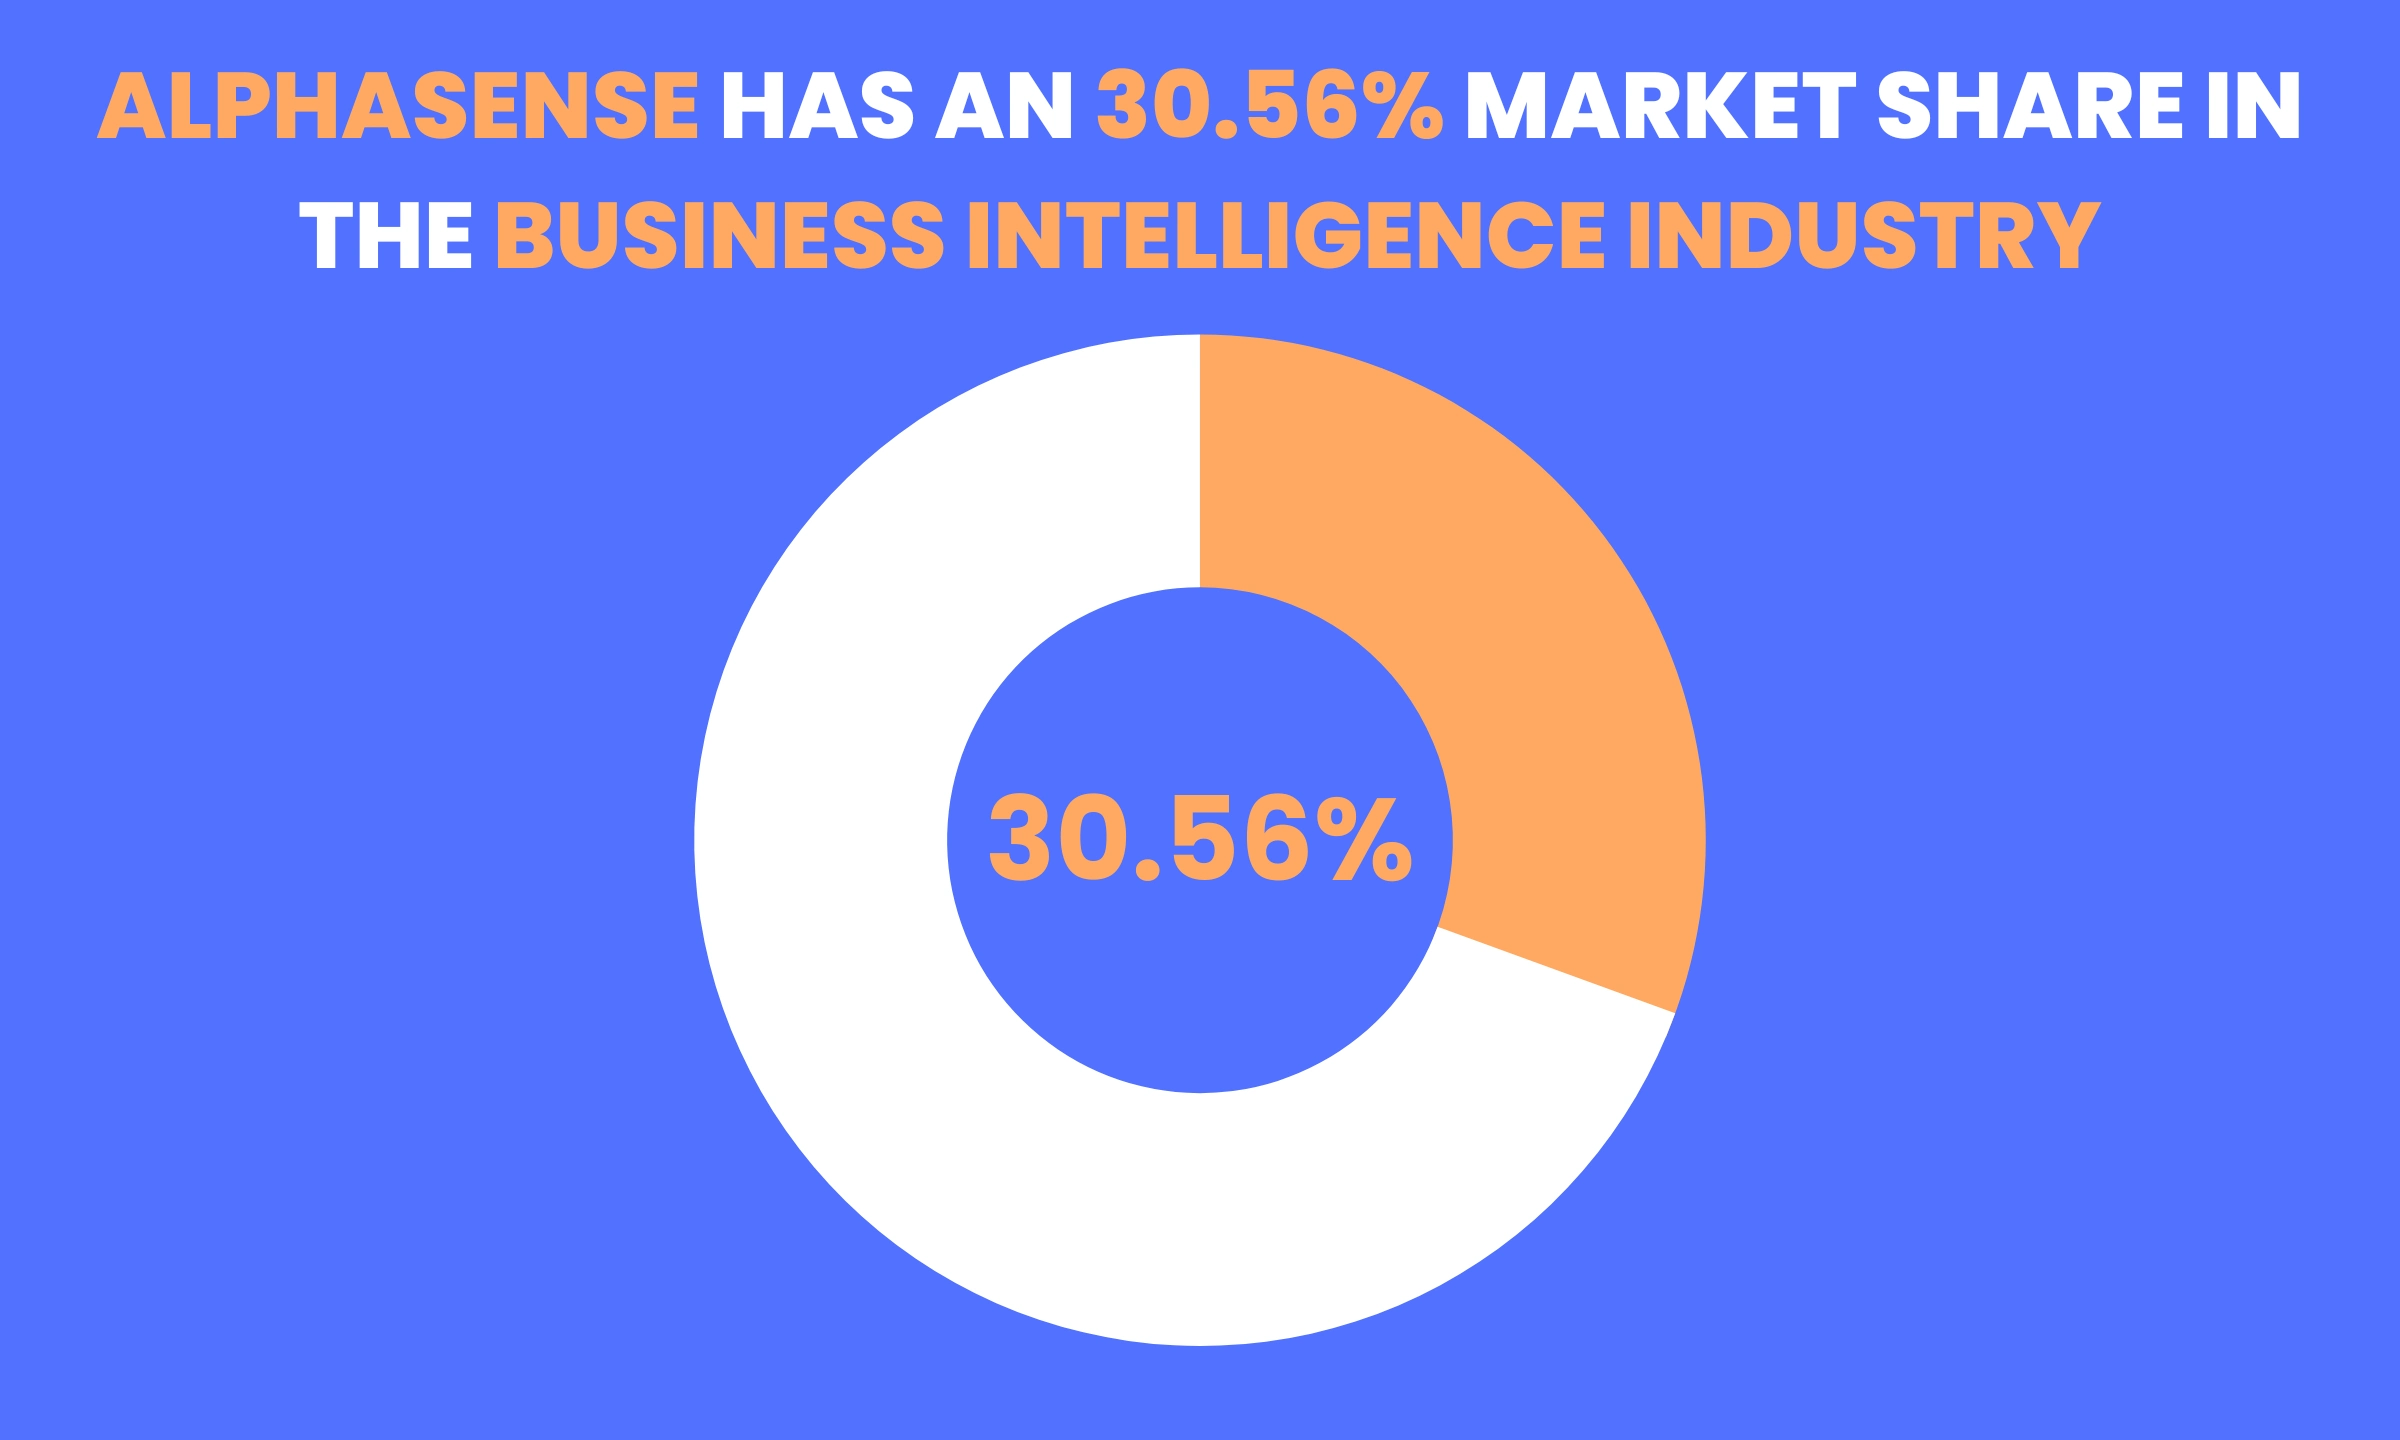 AlphaSense has a 30.56% market share in the business and market intelligence industry